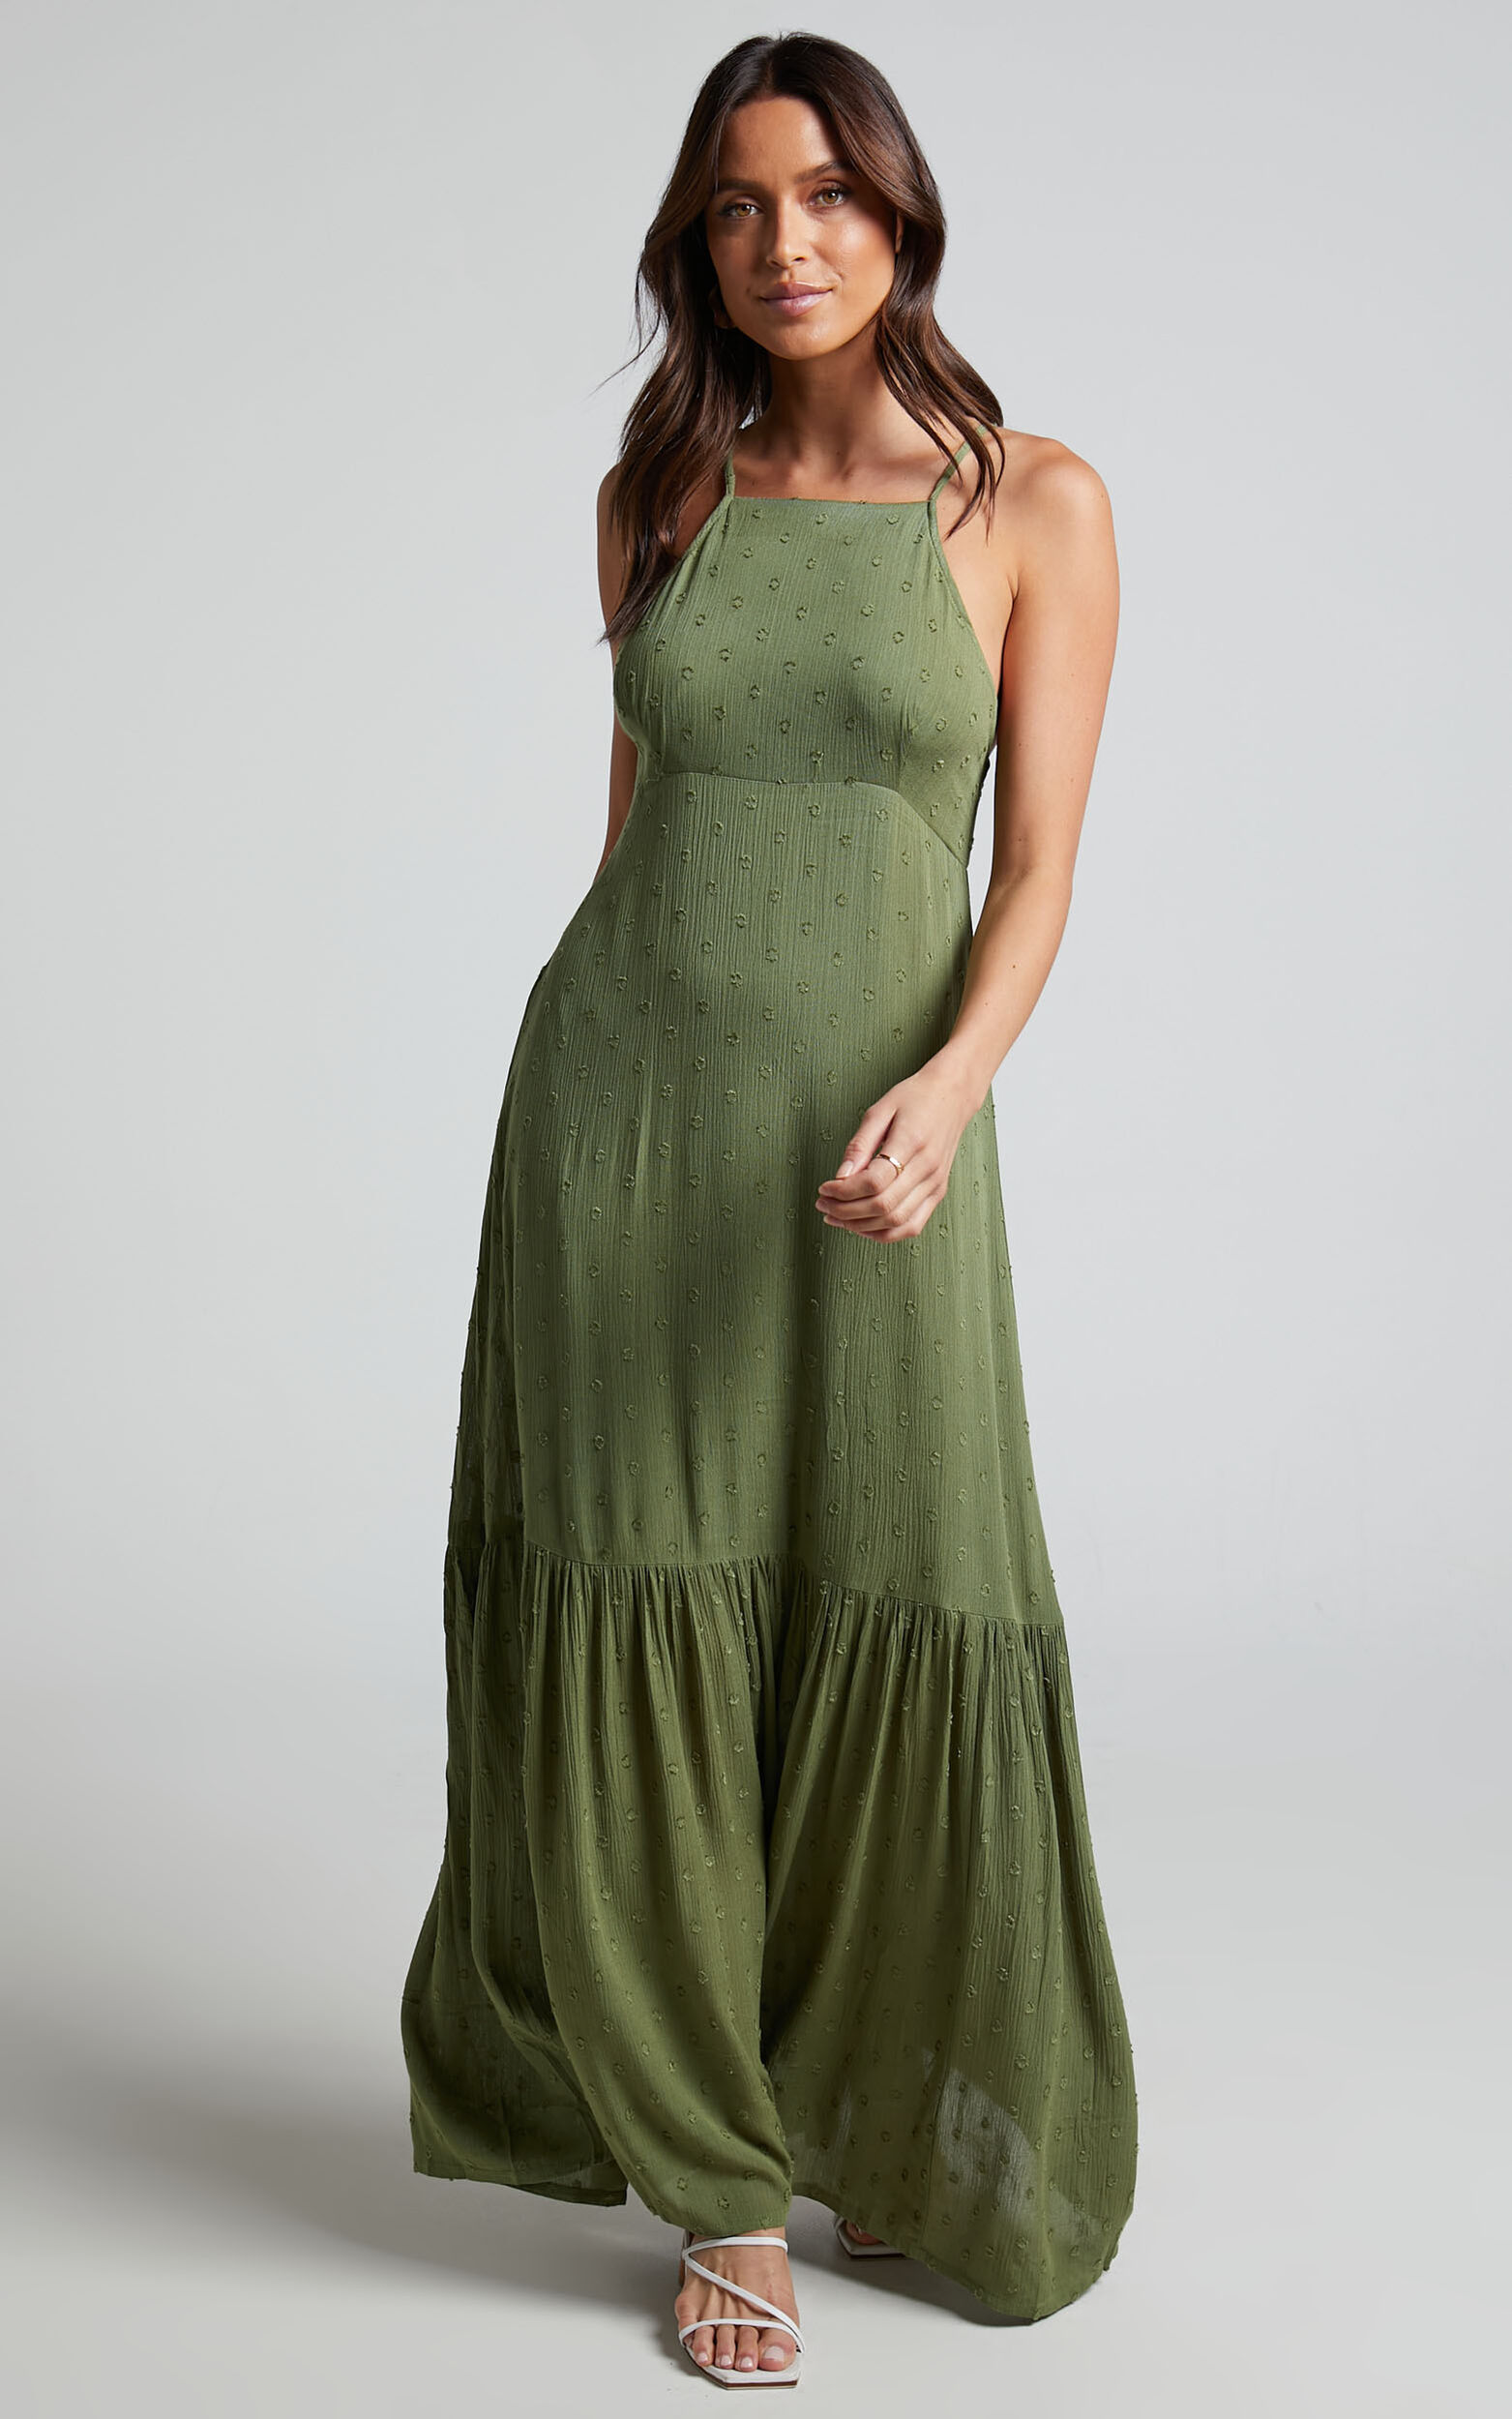 Cariele Midi Dress - Strappy Tiered Dotted Dress in Olive - 06, GRN1